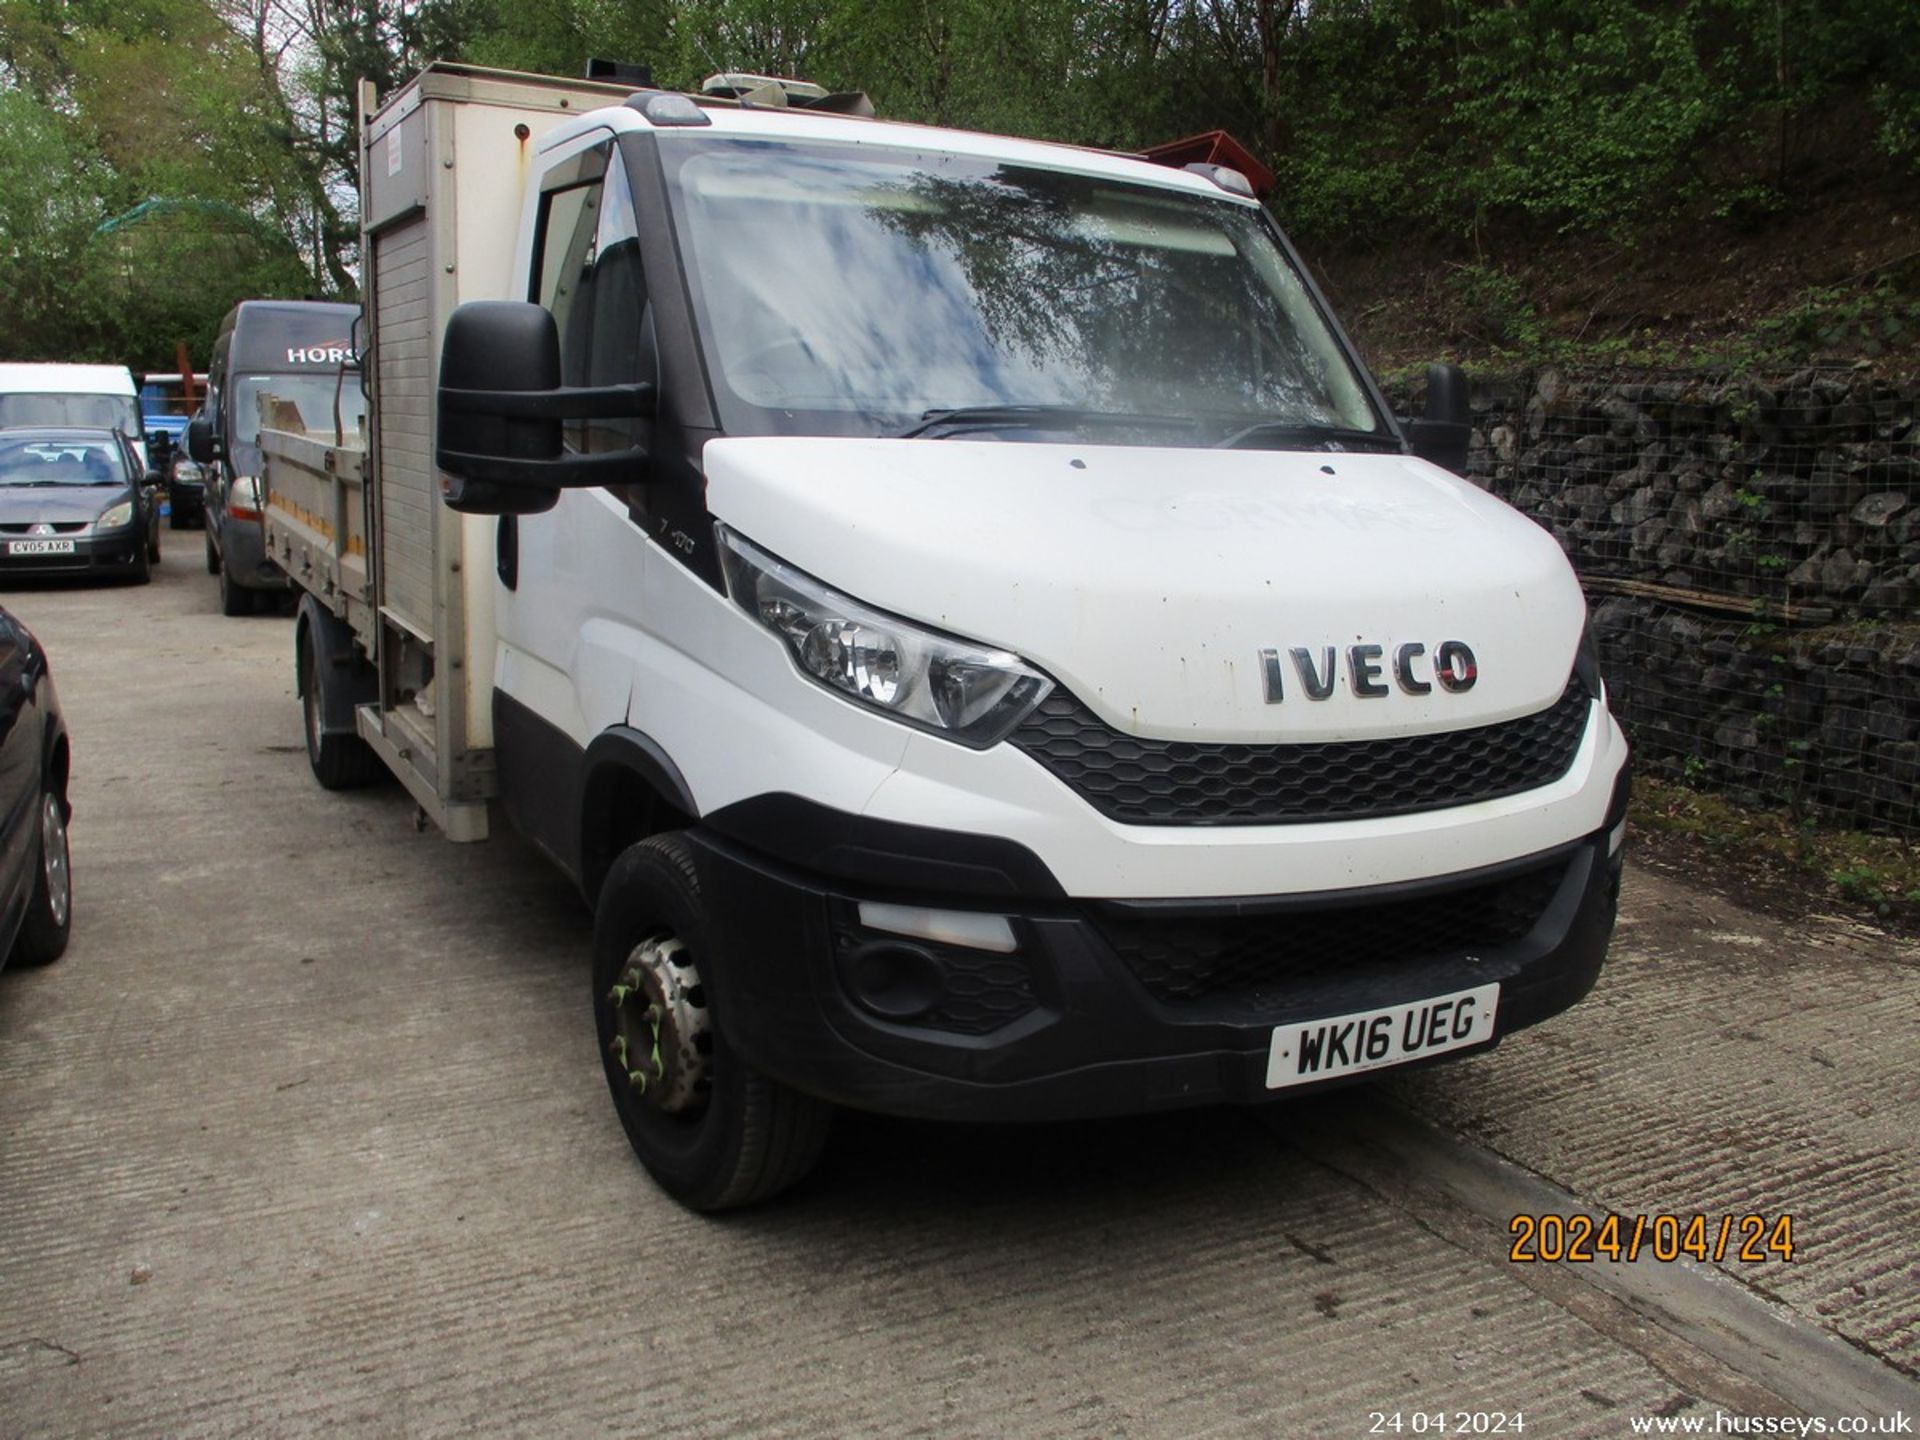 16/16 IVECO DAILY 70C17 - 2998cc 2dr Tipper (White, 193k) - Image 6 of 28